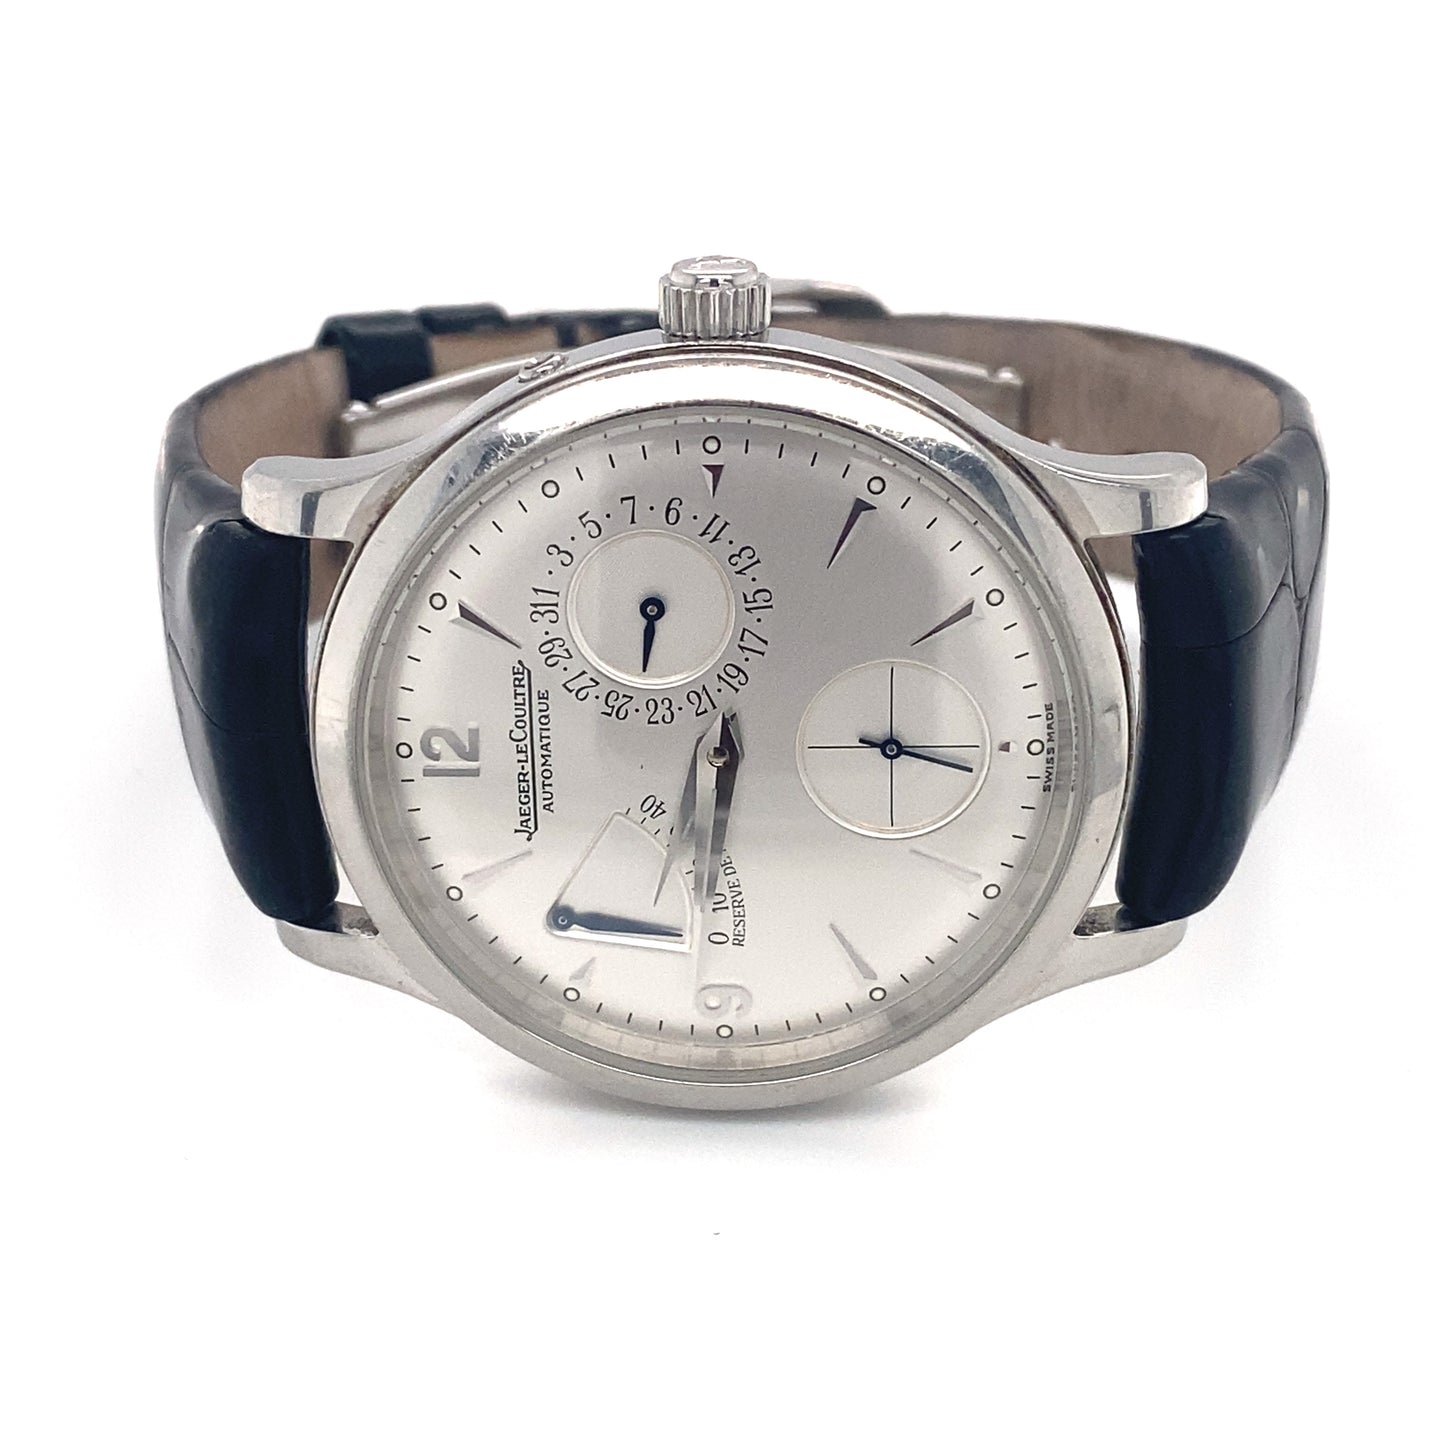 Jaeger-LeCoultre Master Ultra Thin 39mm Case Mens' Wristwatch